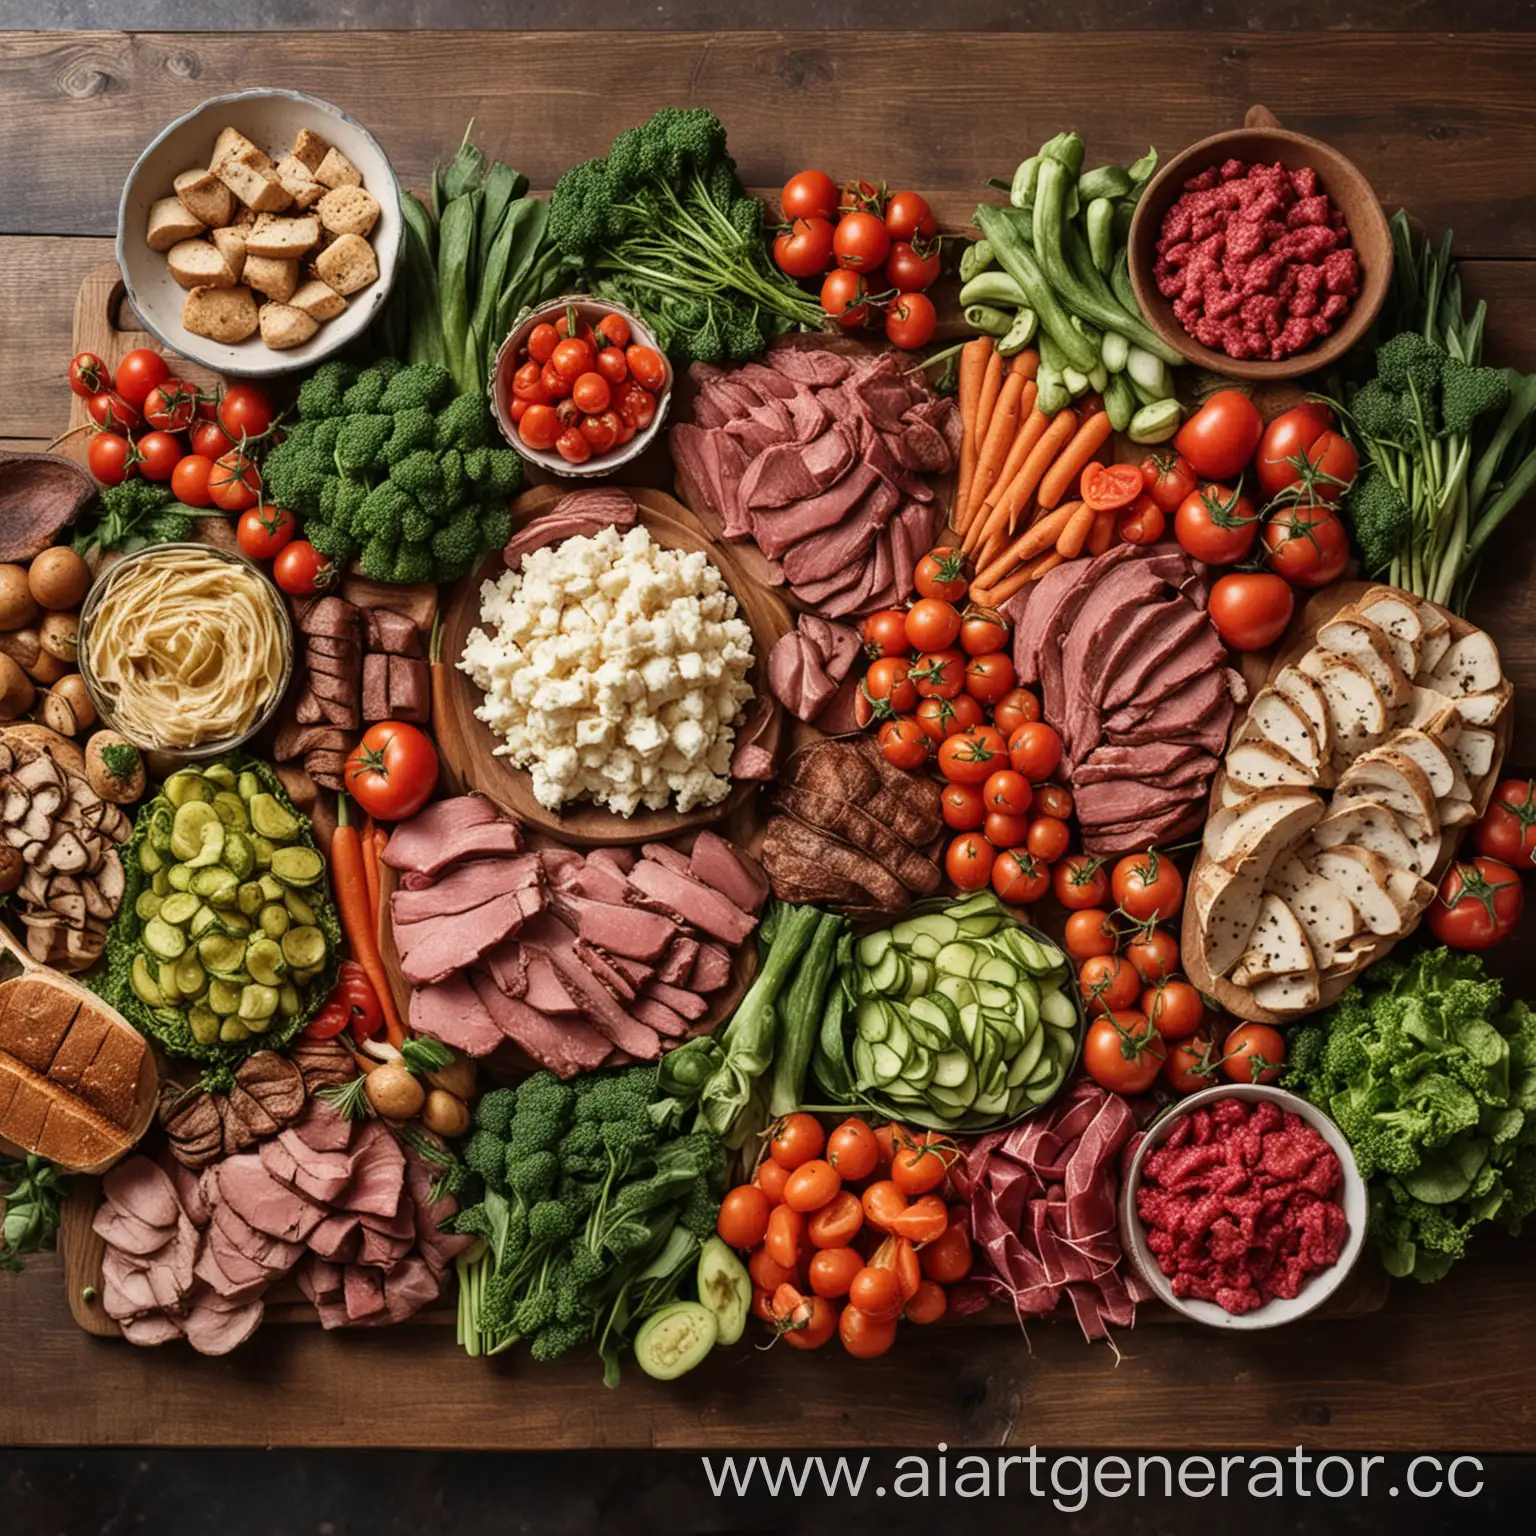 Table-with-Vegetables-and-Meat-Spread